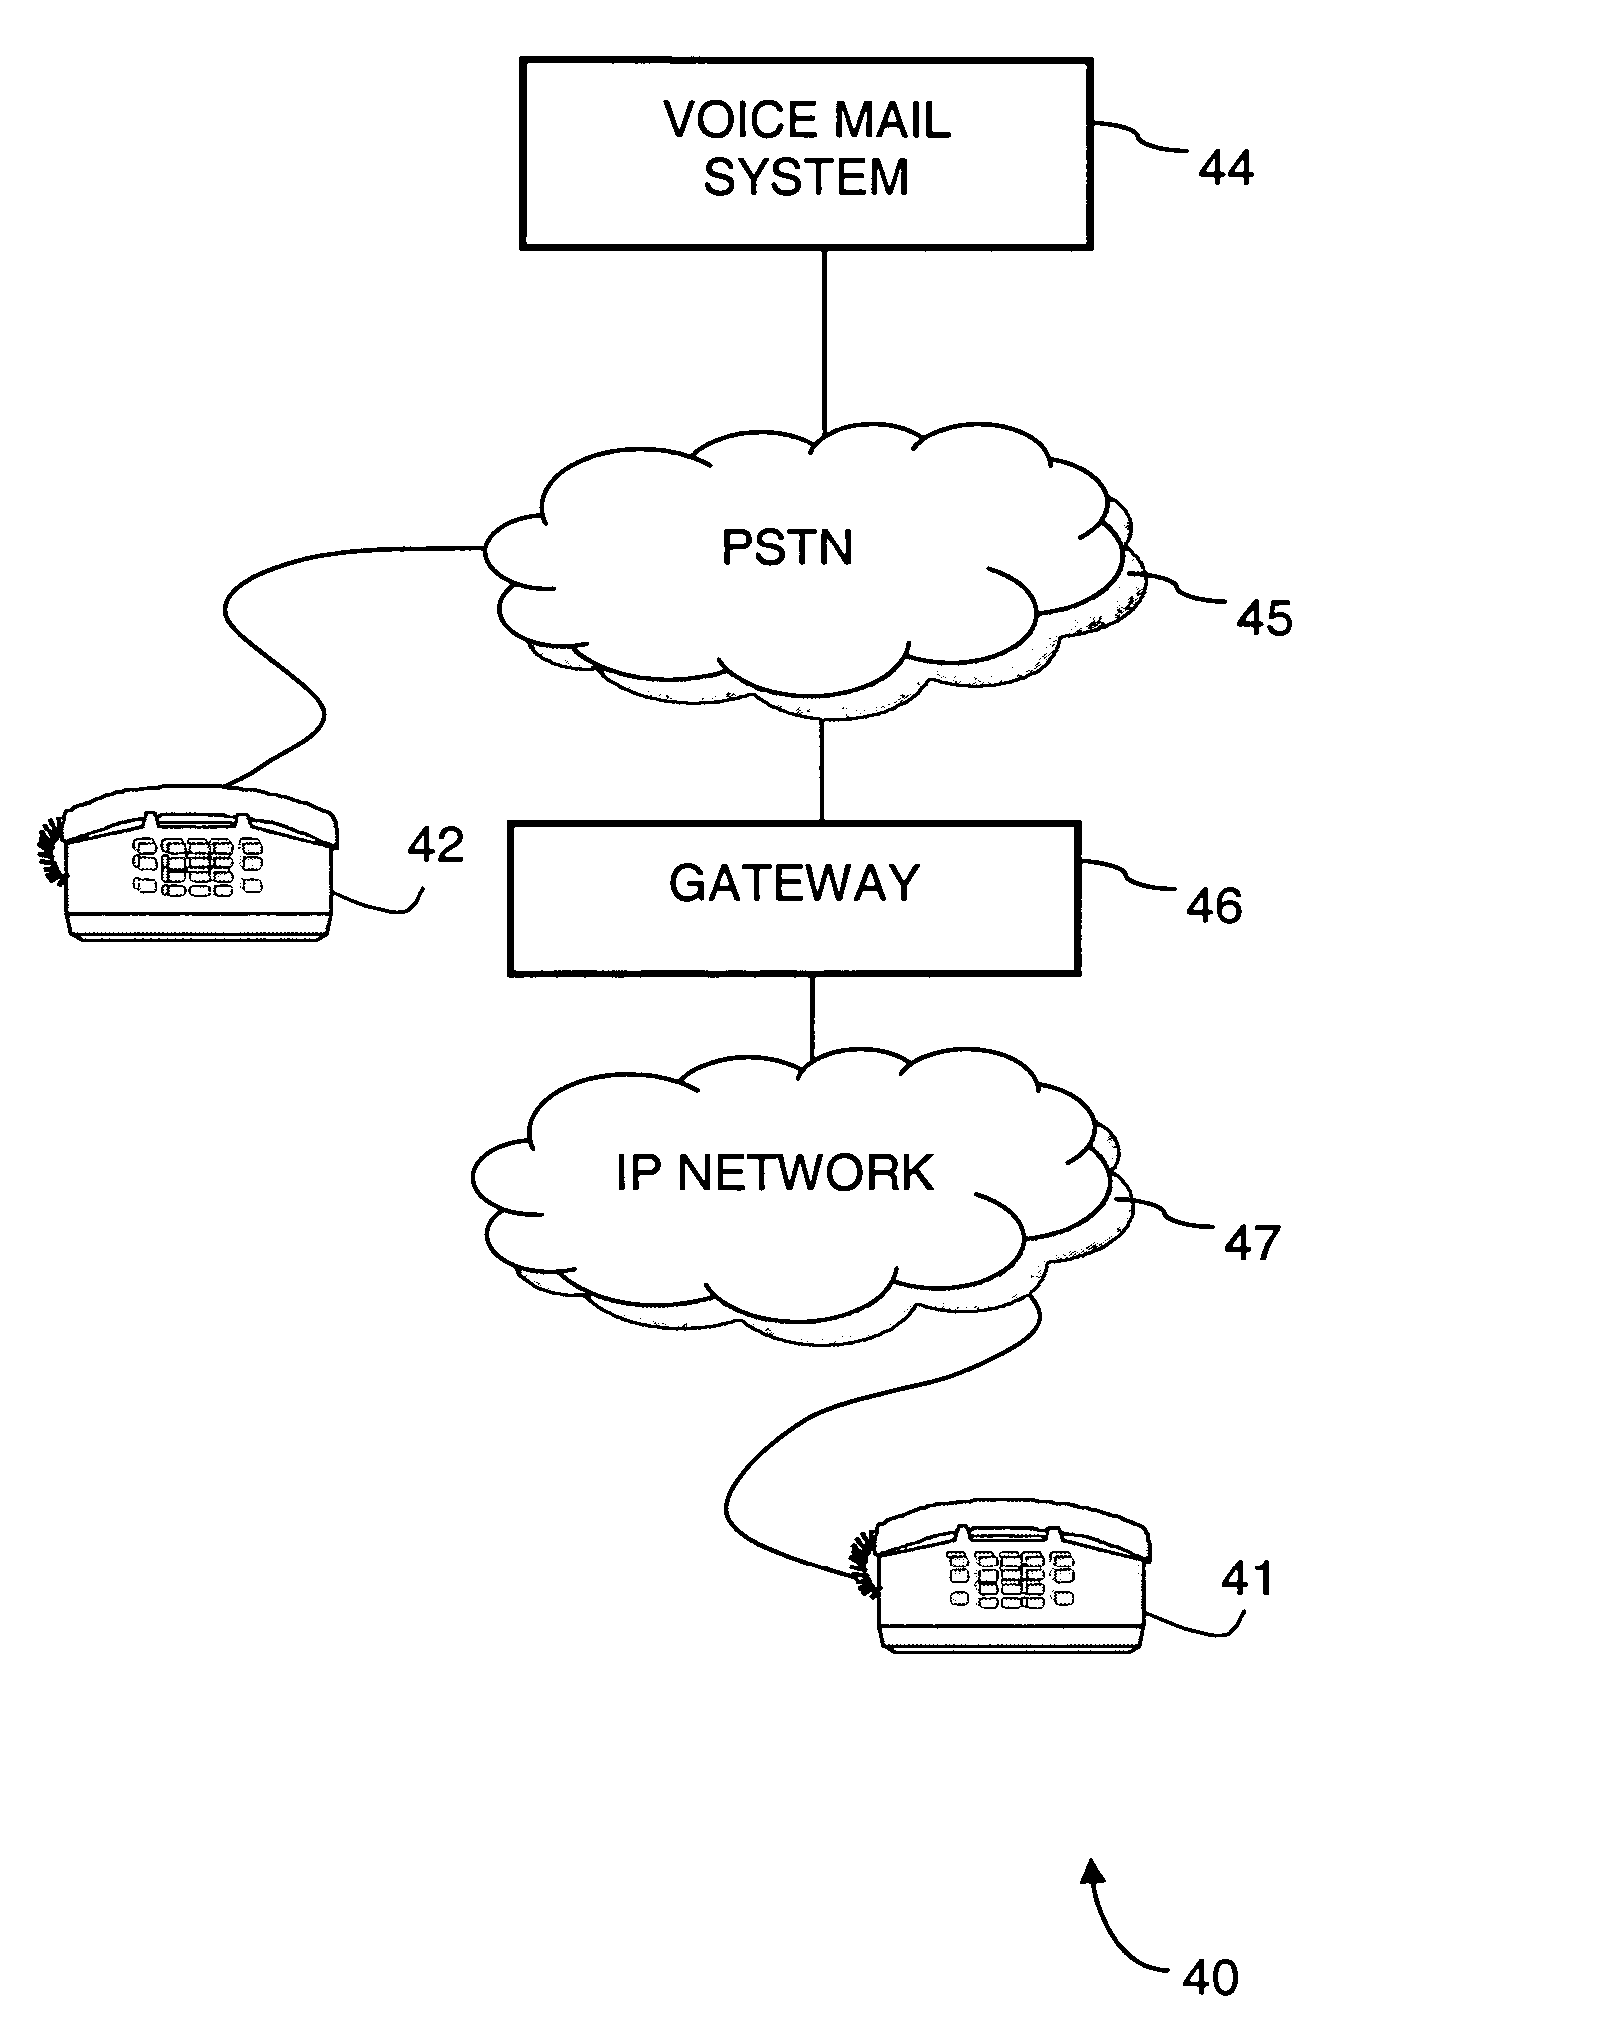 Method and system for providing a call answering service between a source telephone and a target telephone